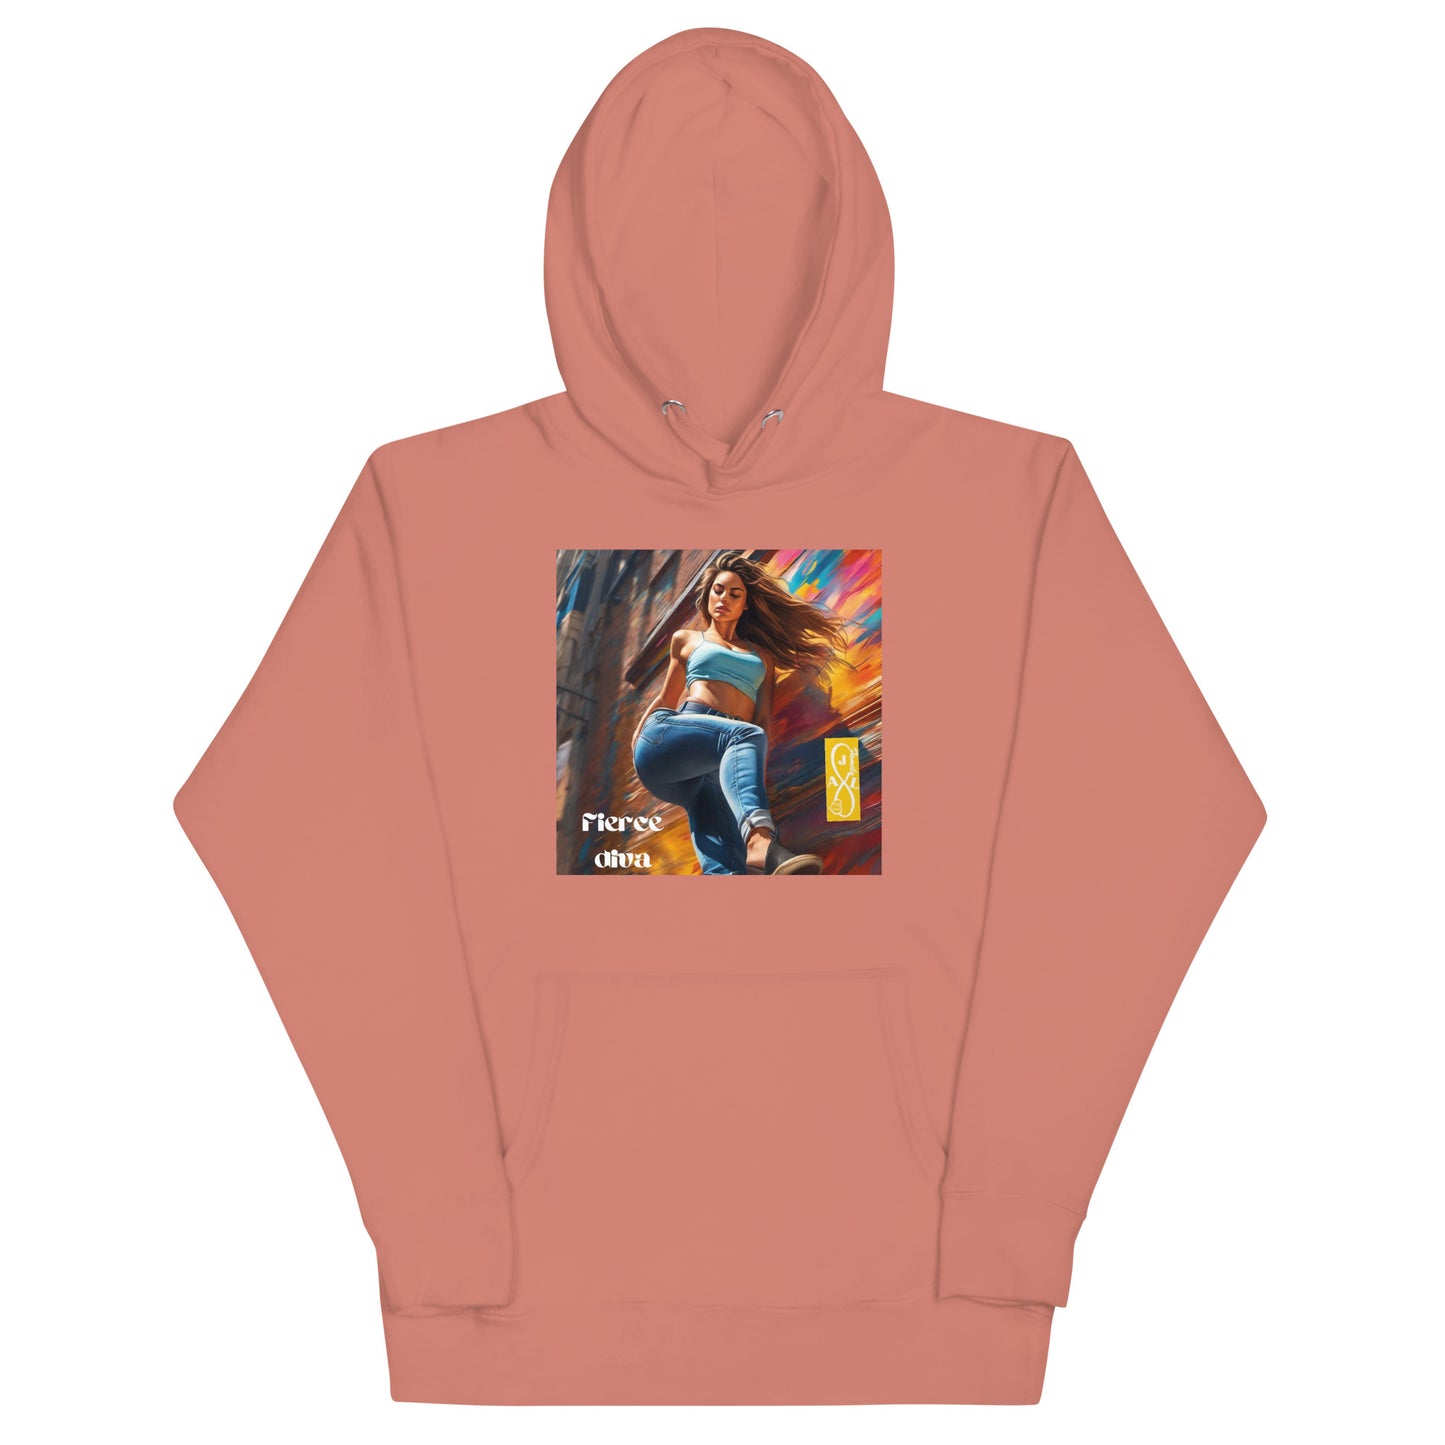 AJL Collection Woman’s Pullover Hoodie